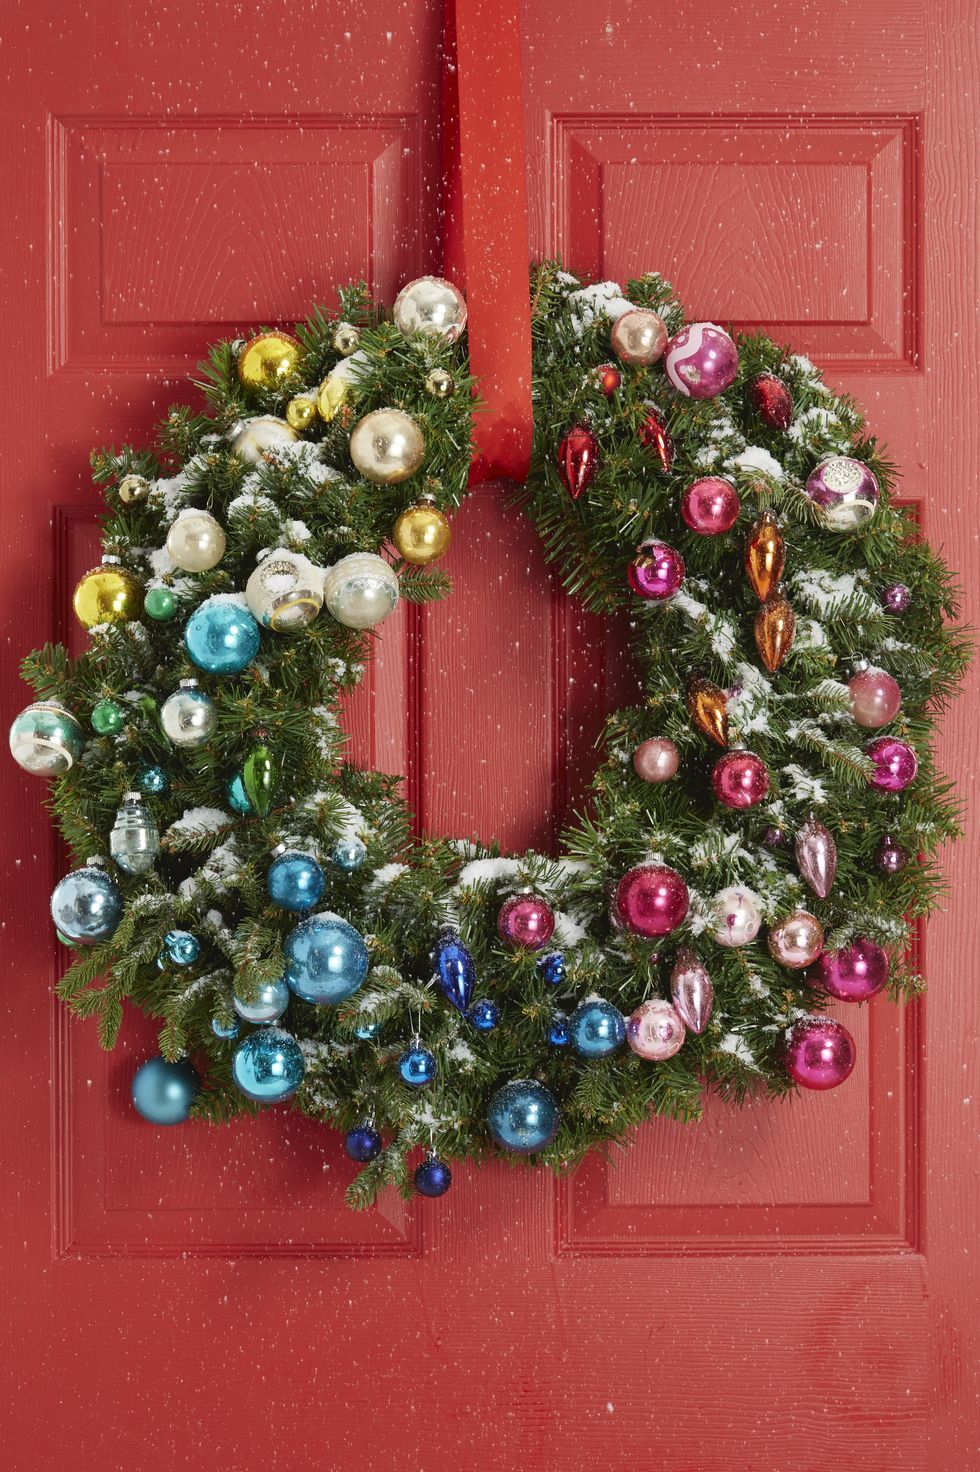 Christmas-Themed Door Decorations To Inspire You For Next Year!.  TeachersMag.com